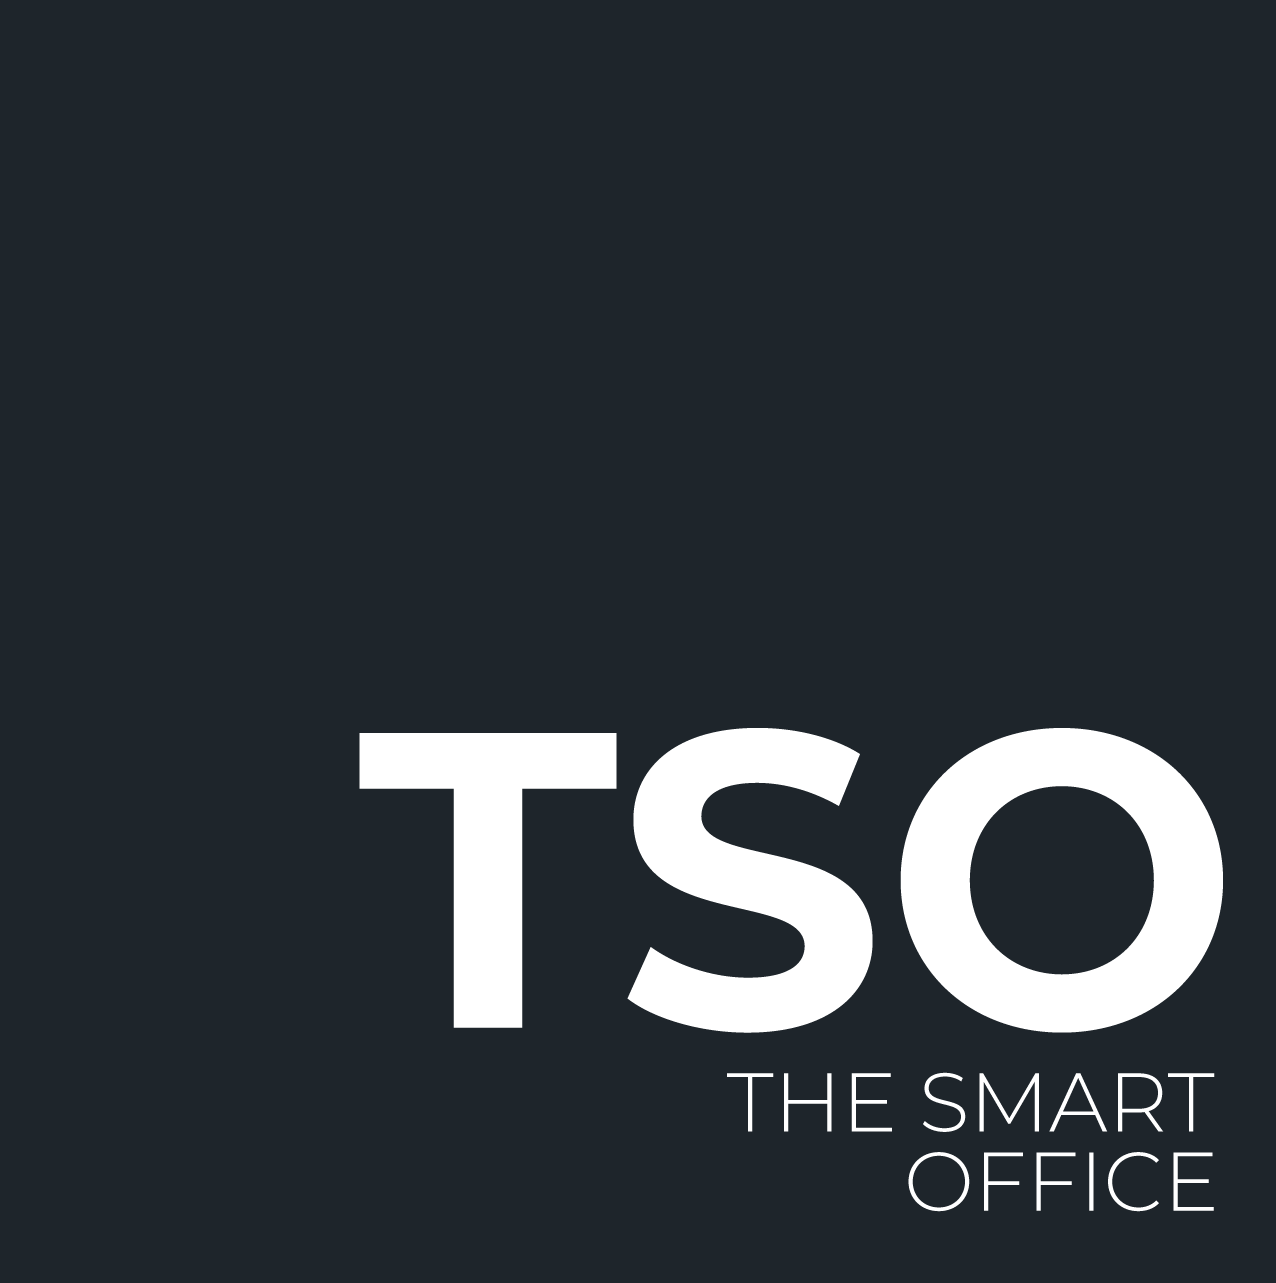 THE SMART OFFICE